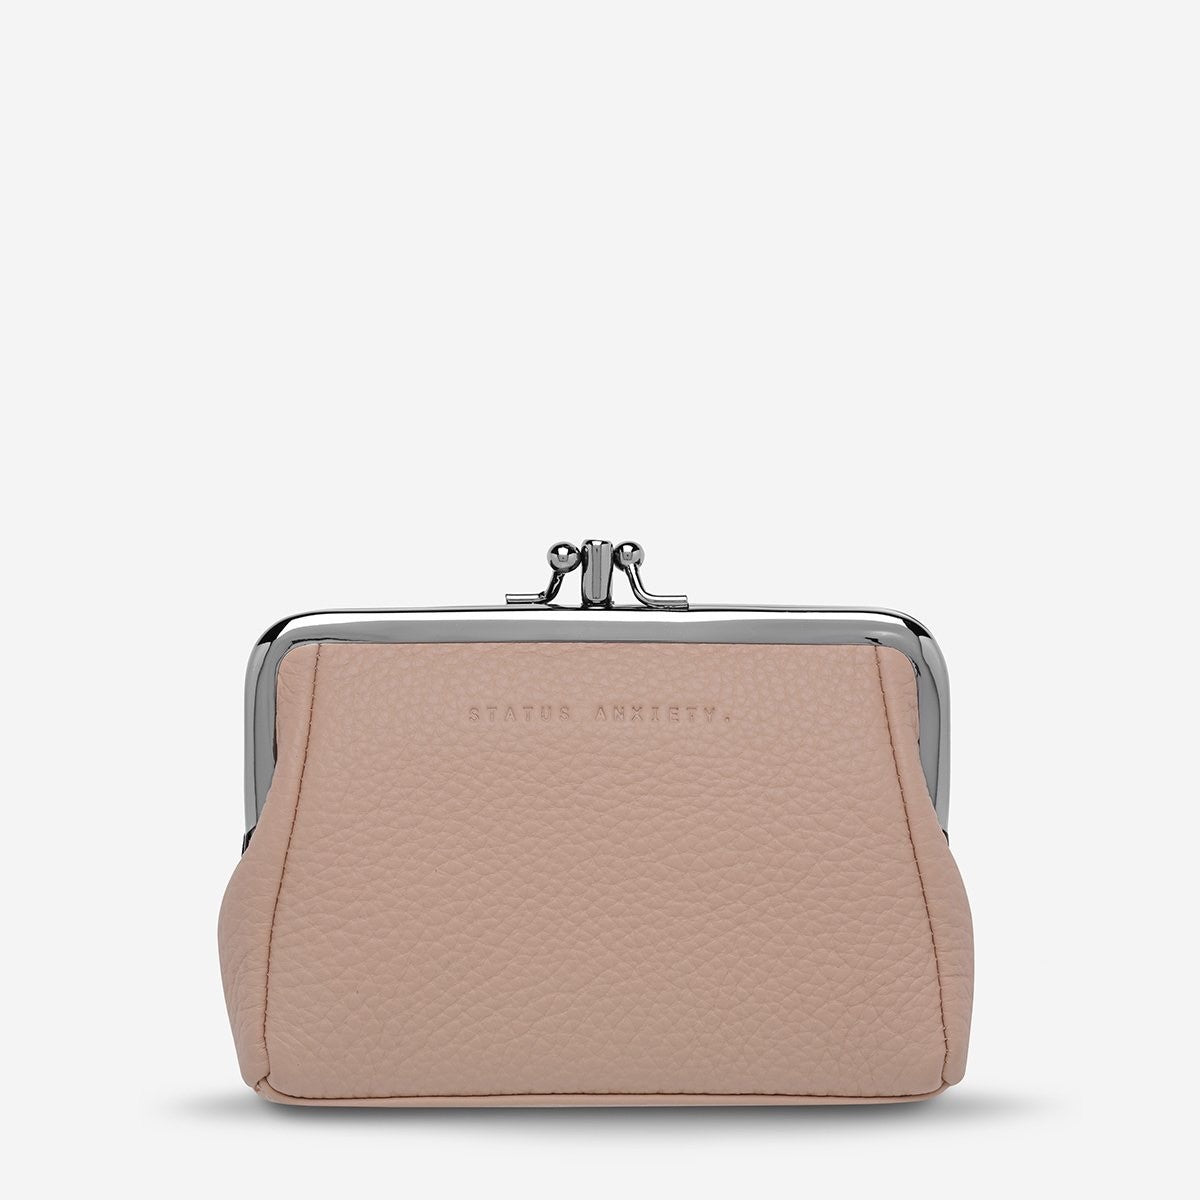 Status Anxiety Volatile Purse [COLOUR:Dusty pink]